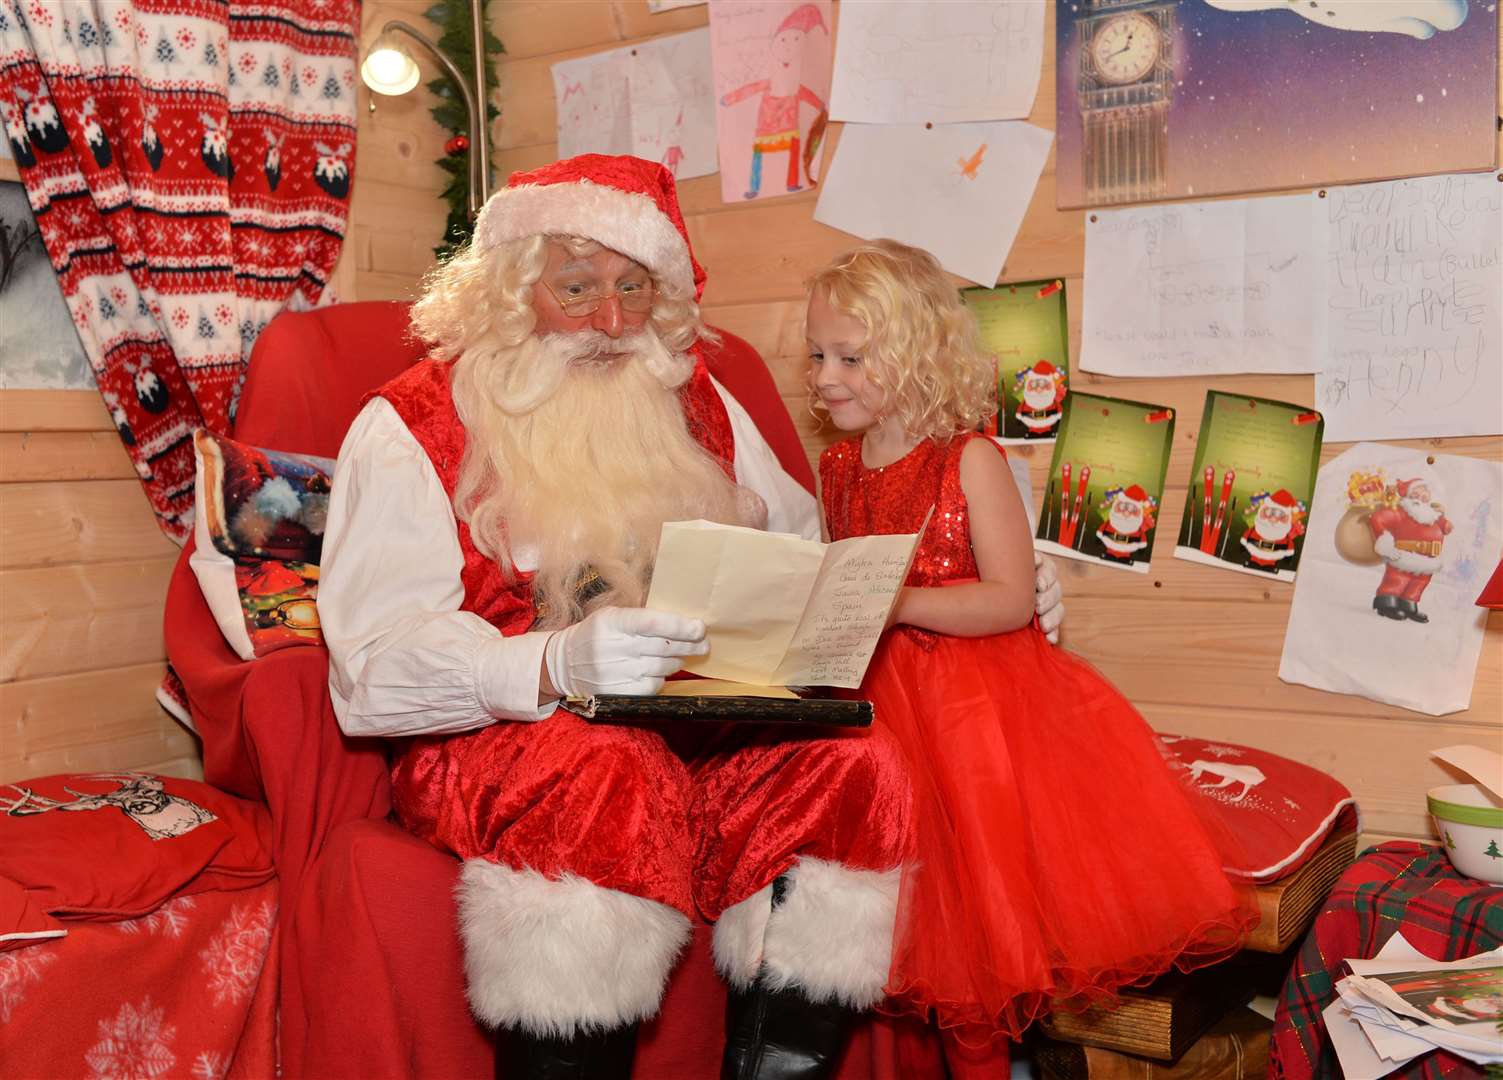 Father Christmas is scheduled to come to Tunbridge Wells